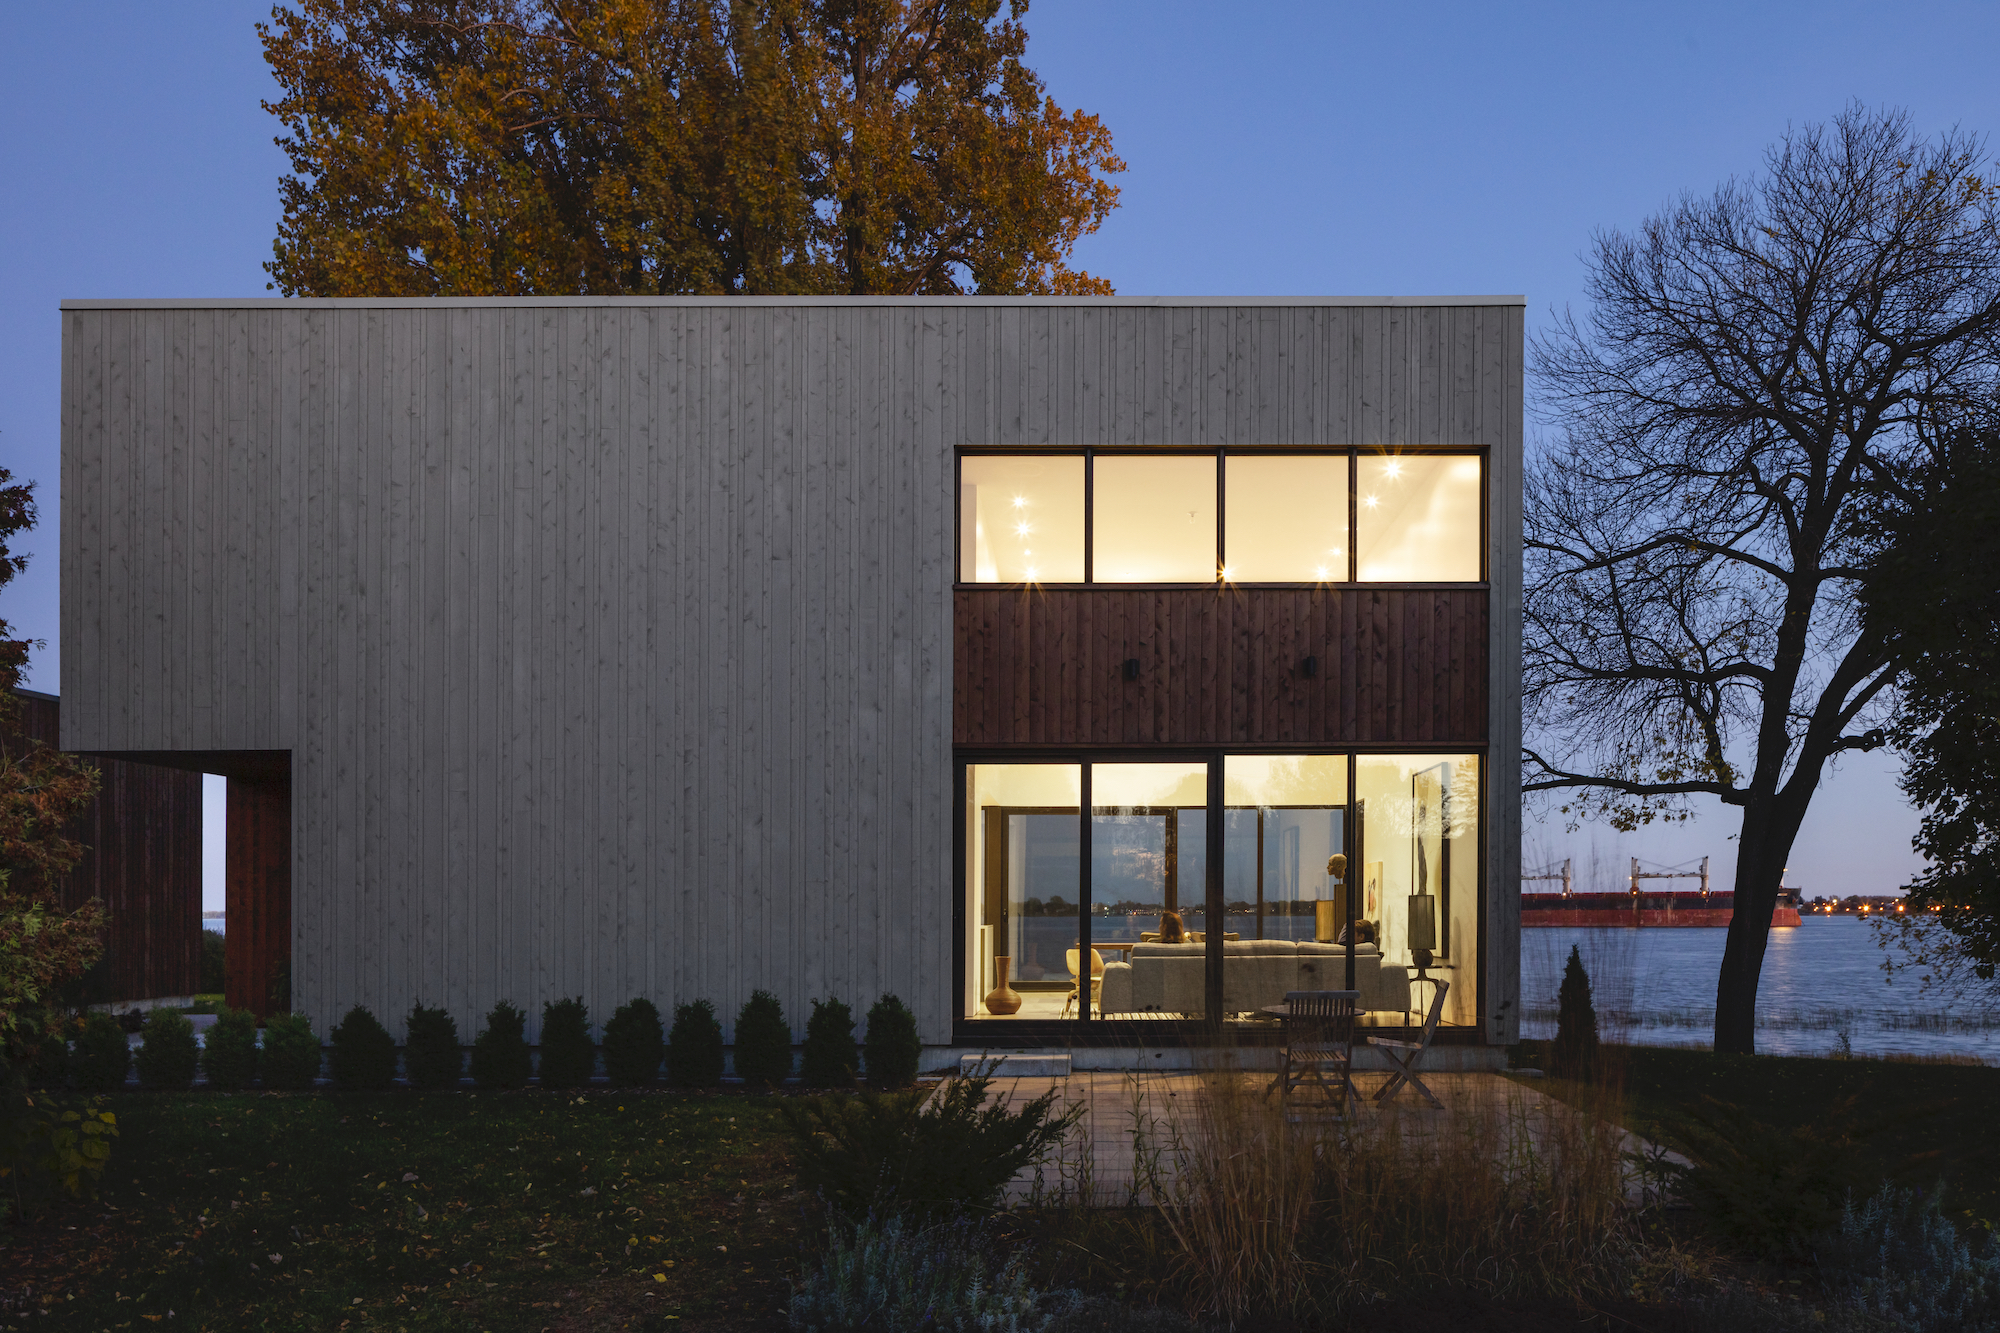 A rectangular house with large glass wall that offers view out to lake in the back.